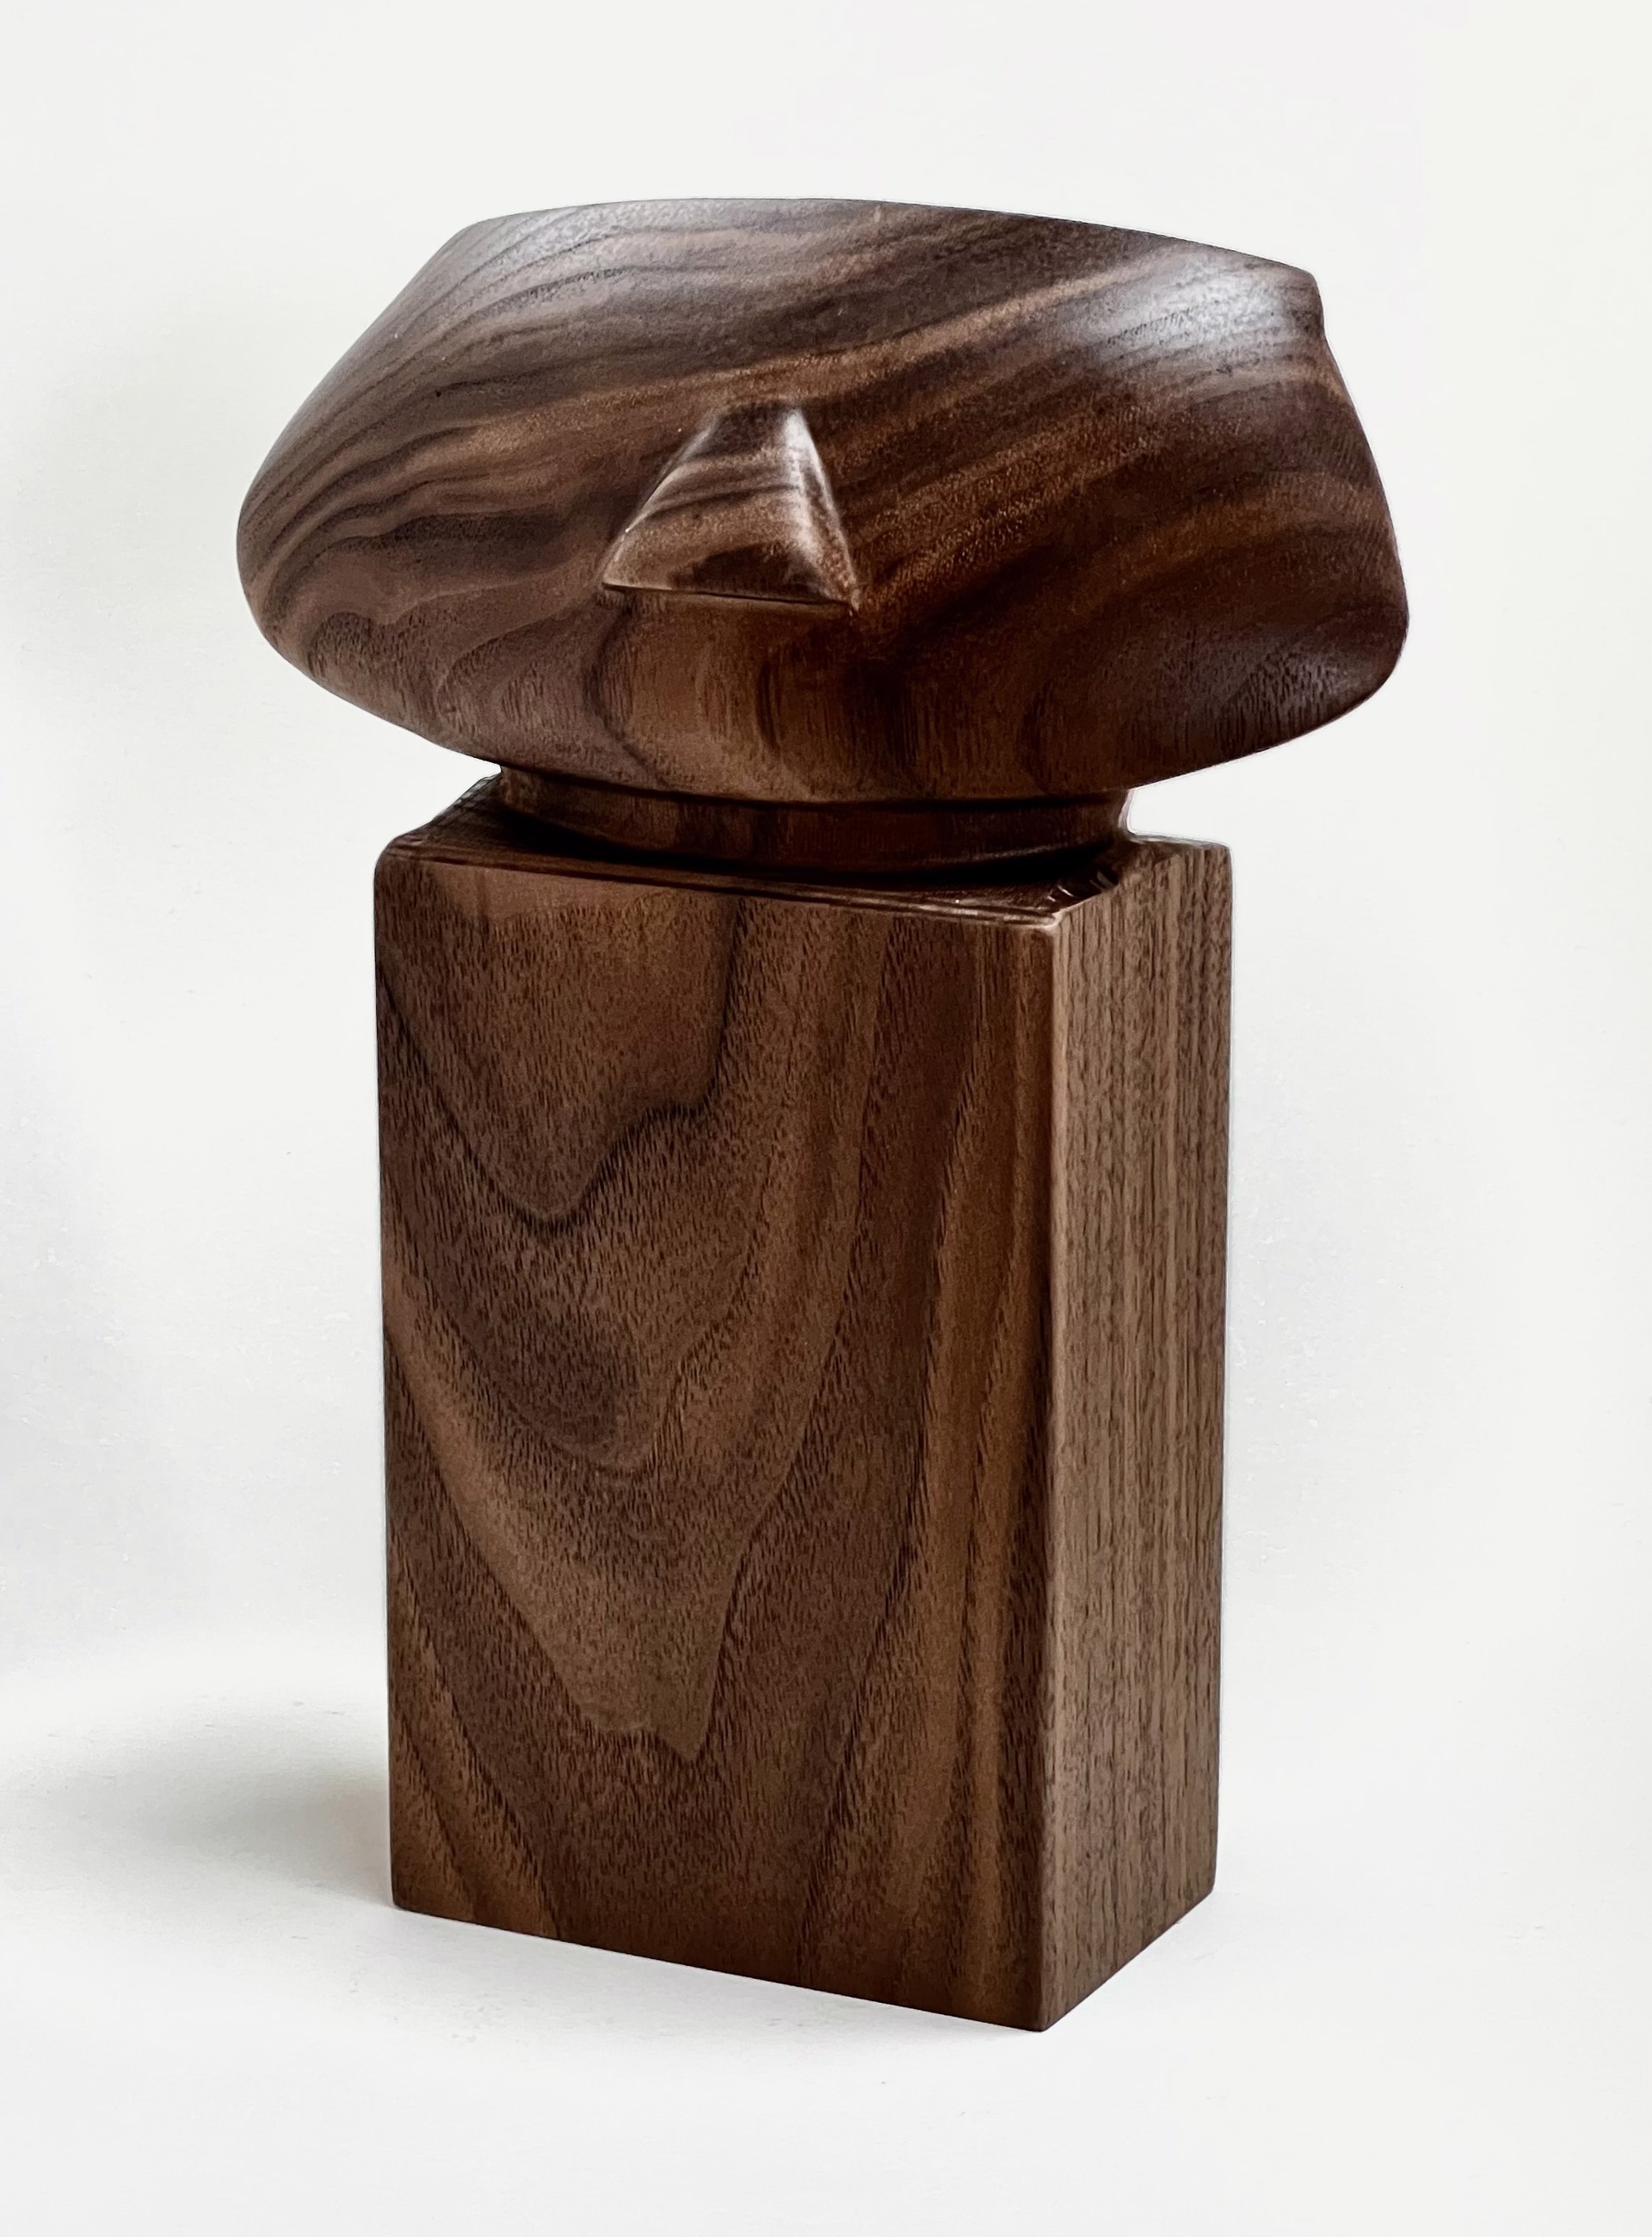 Person Sculpture in Walnut by Dana Younger